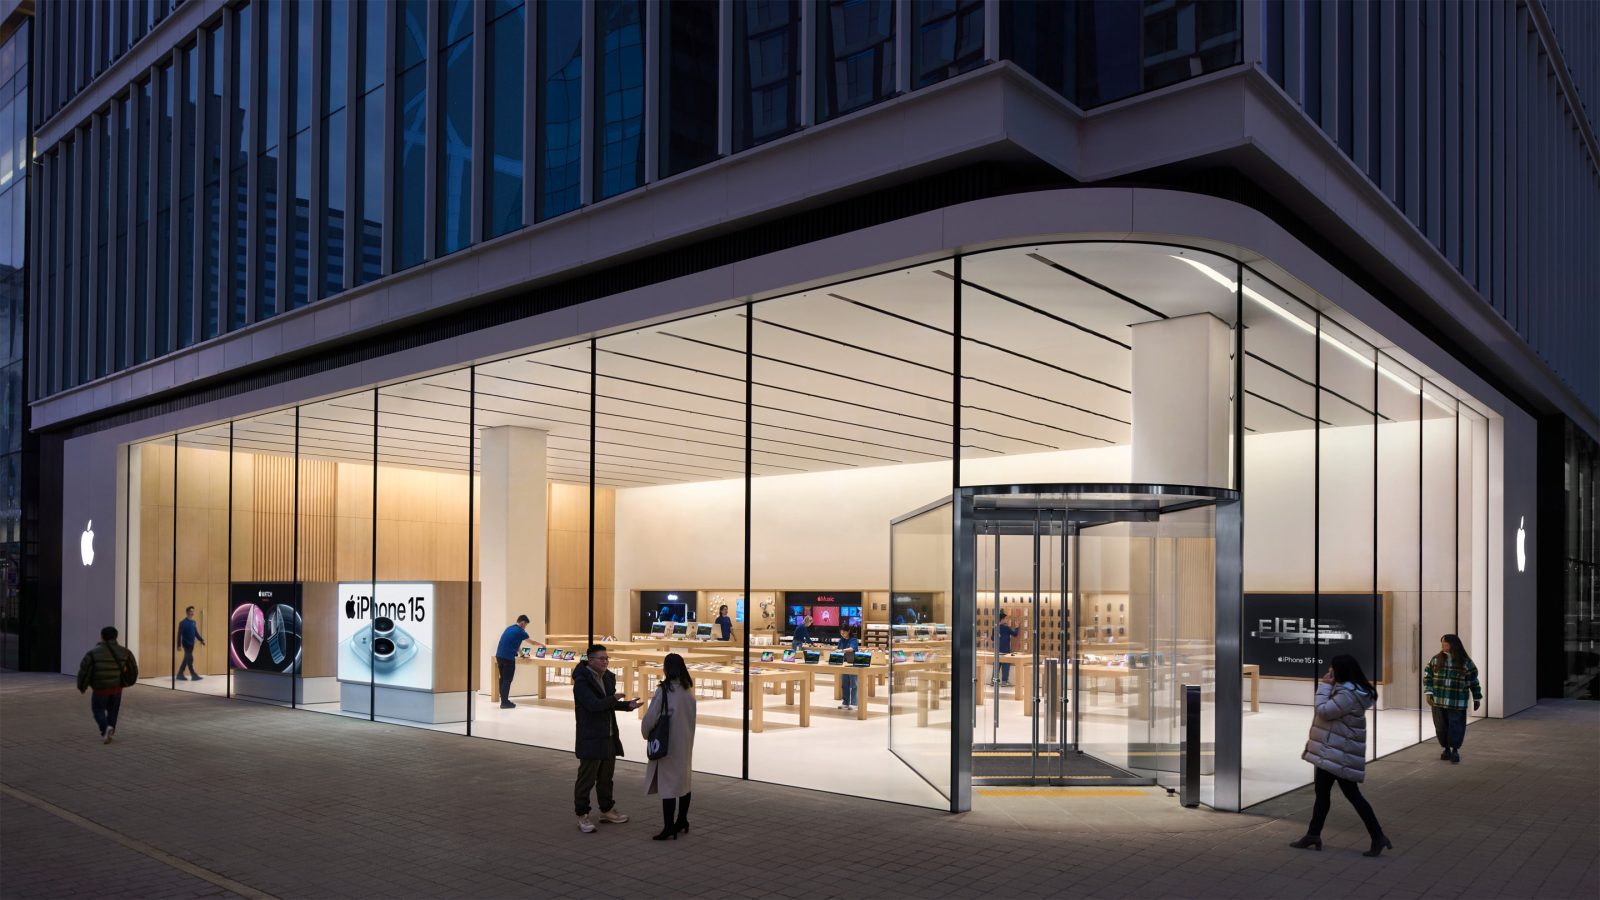 Apple teases its new Hongdae store in South Korea which opens on Saturday